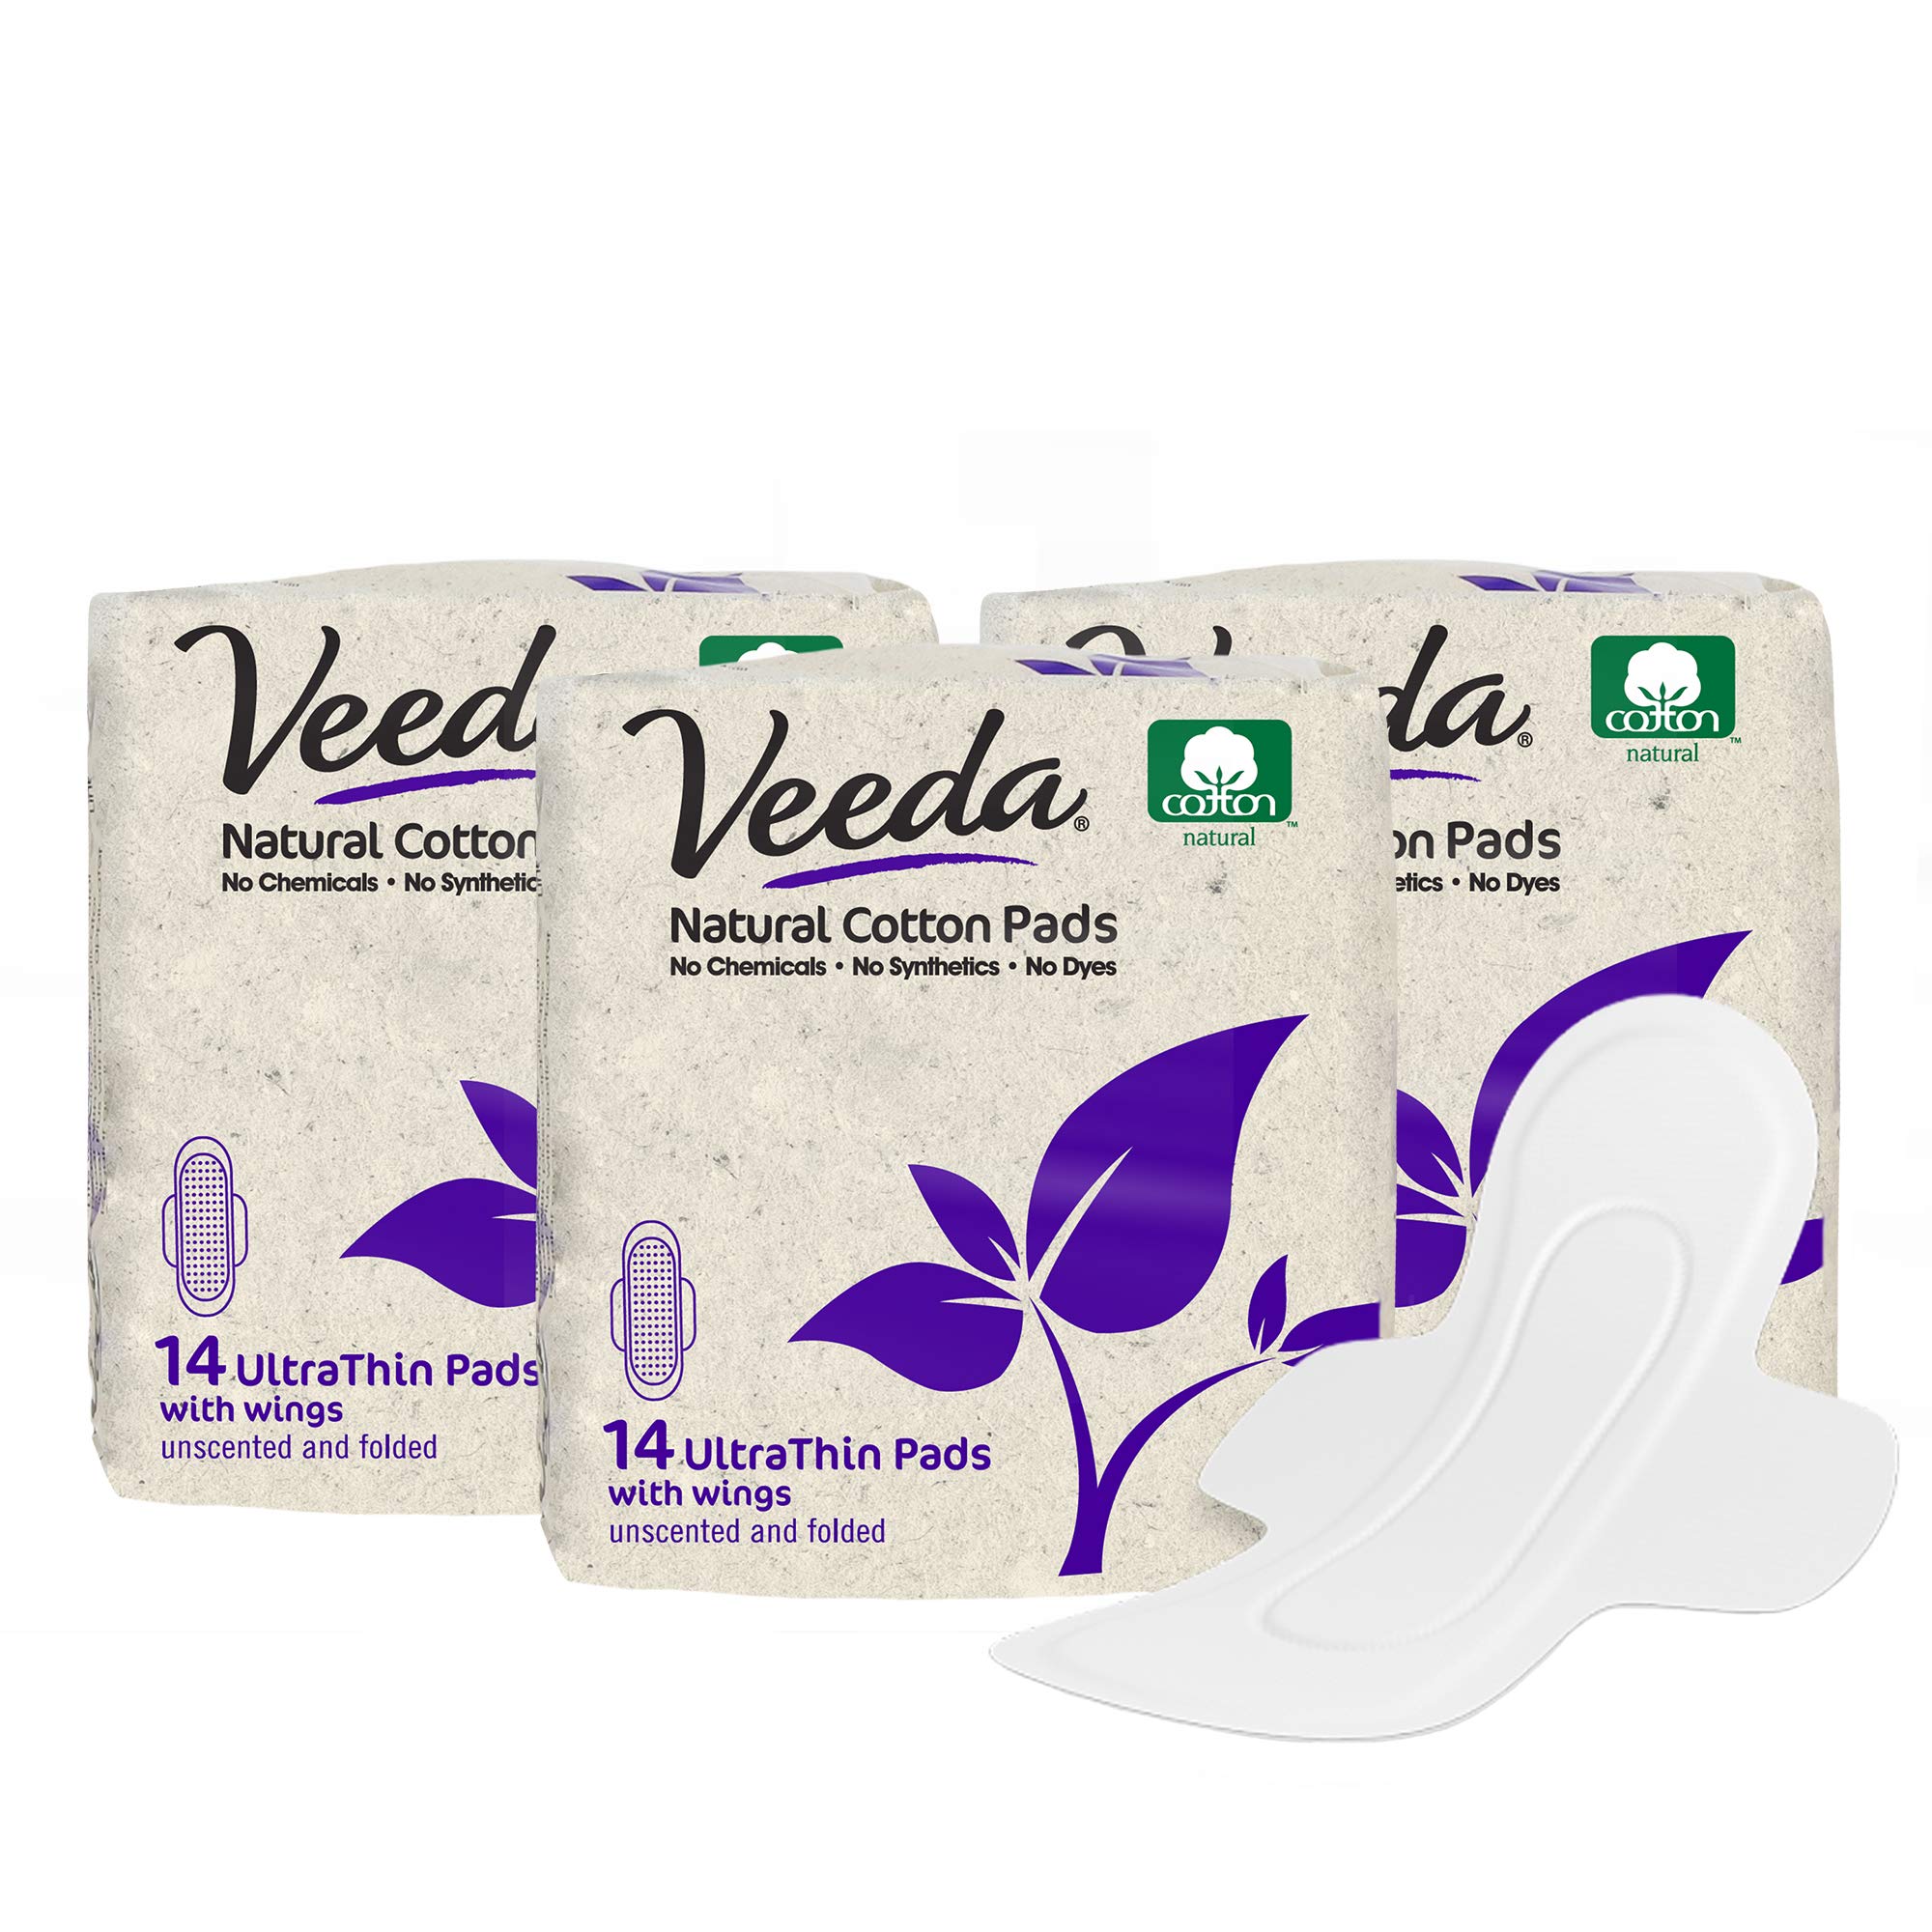 Veeda Ultra Thin Super Absorbent Day Pads Are Always Chlorine